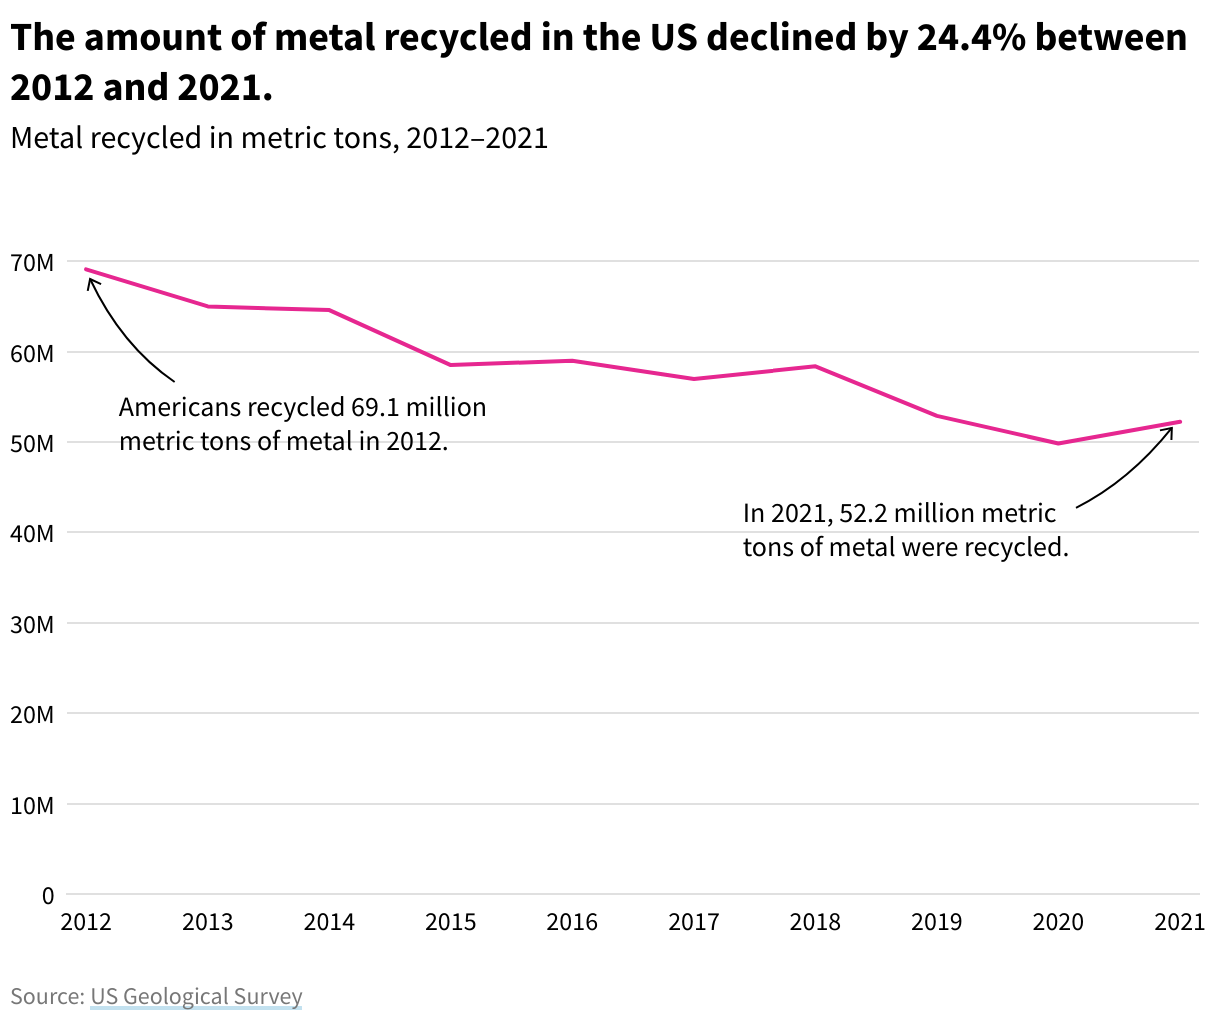 Line chart showing that the amount of metal recycled decreased from close to 70 million metric tons in 2012 to 49.8 million metric tons in 2020, then increasing slightly to 52 million metric tons in 2021.